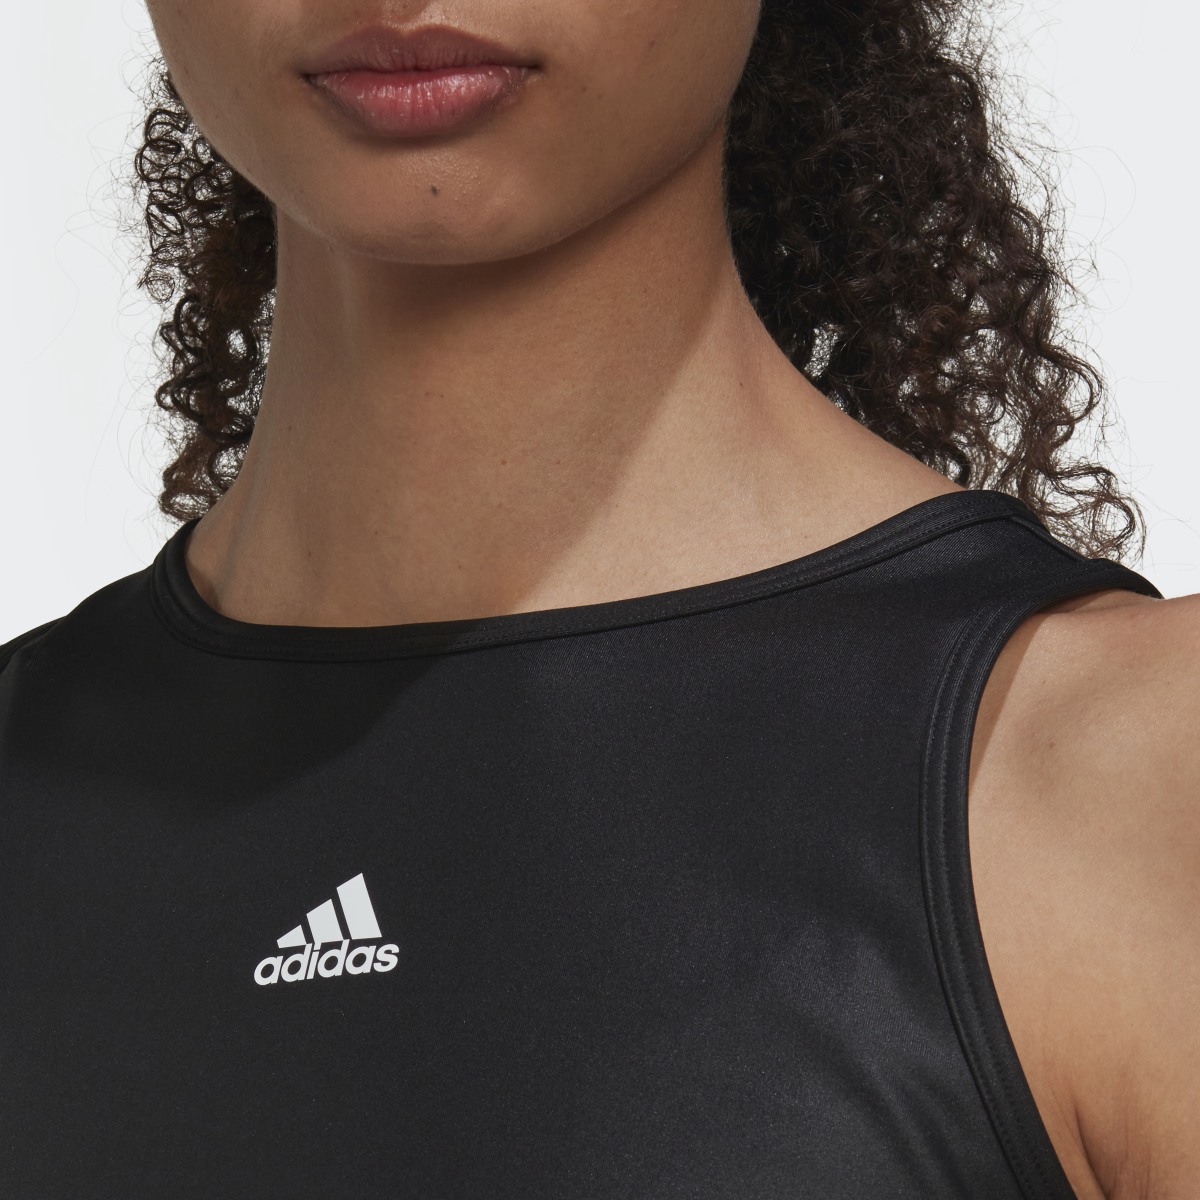 Adidas Hyperglam Fitted Tank Top With Cutout Detail. 8